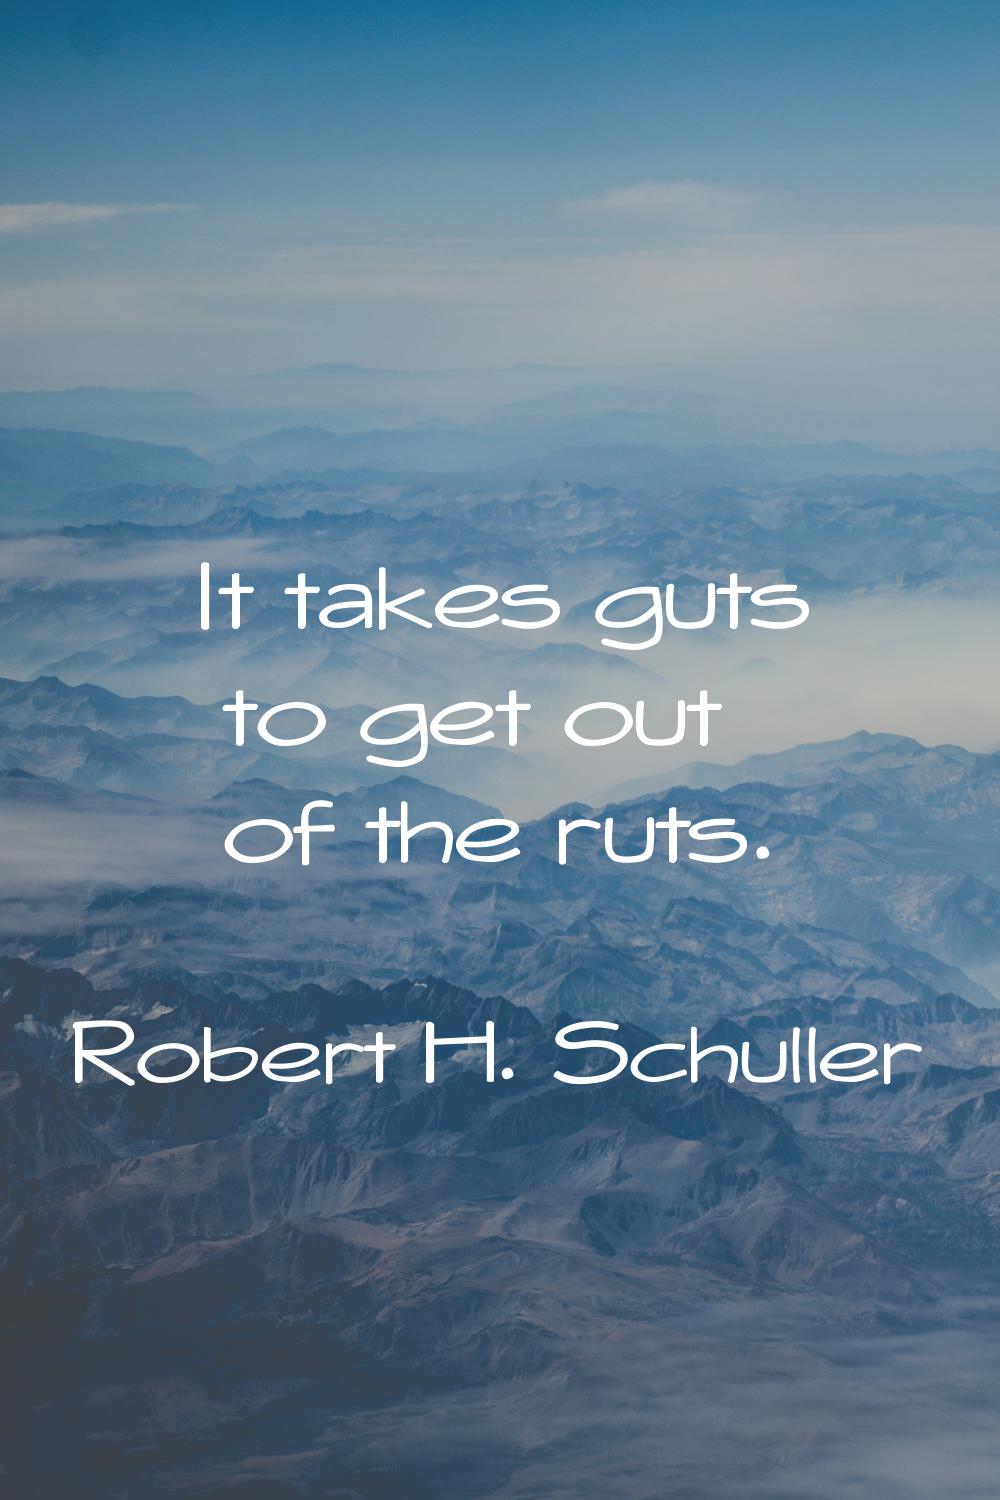 It takes guts to get out of the ruts.